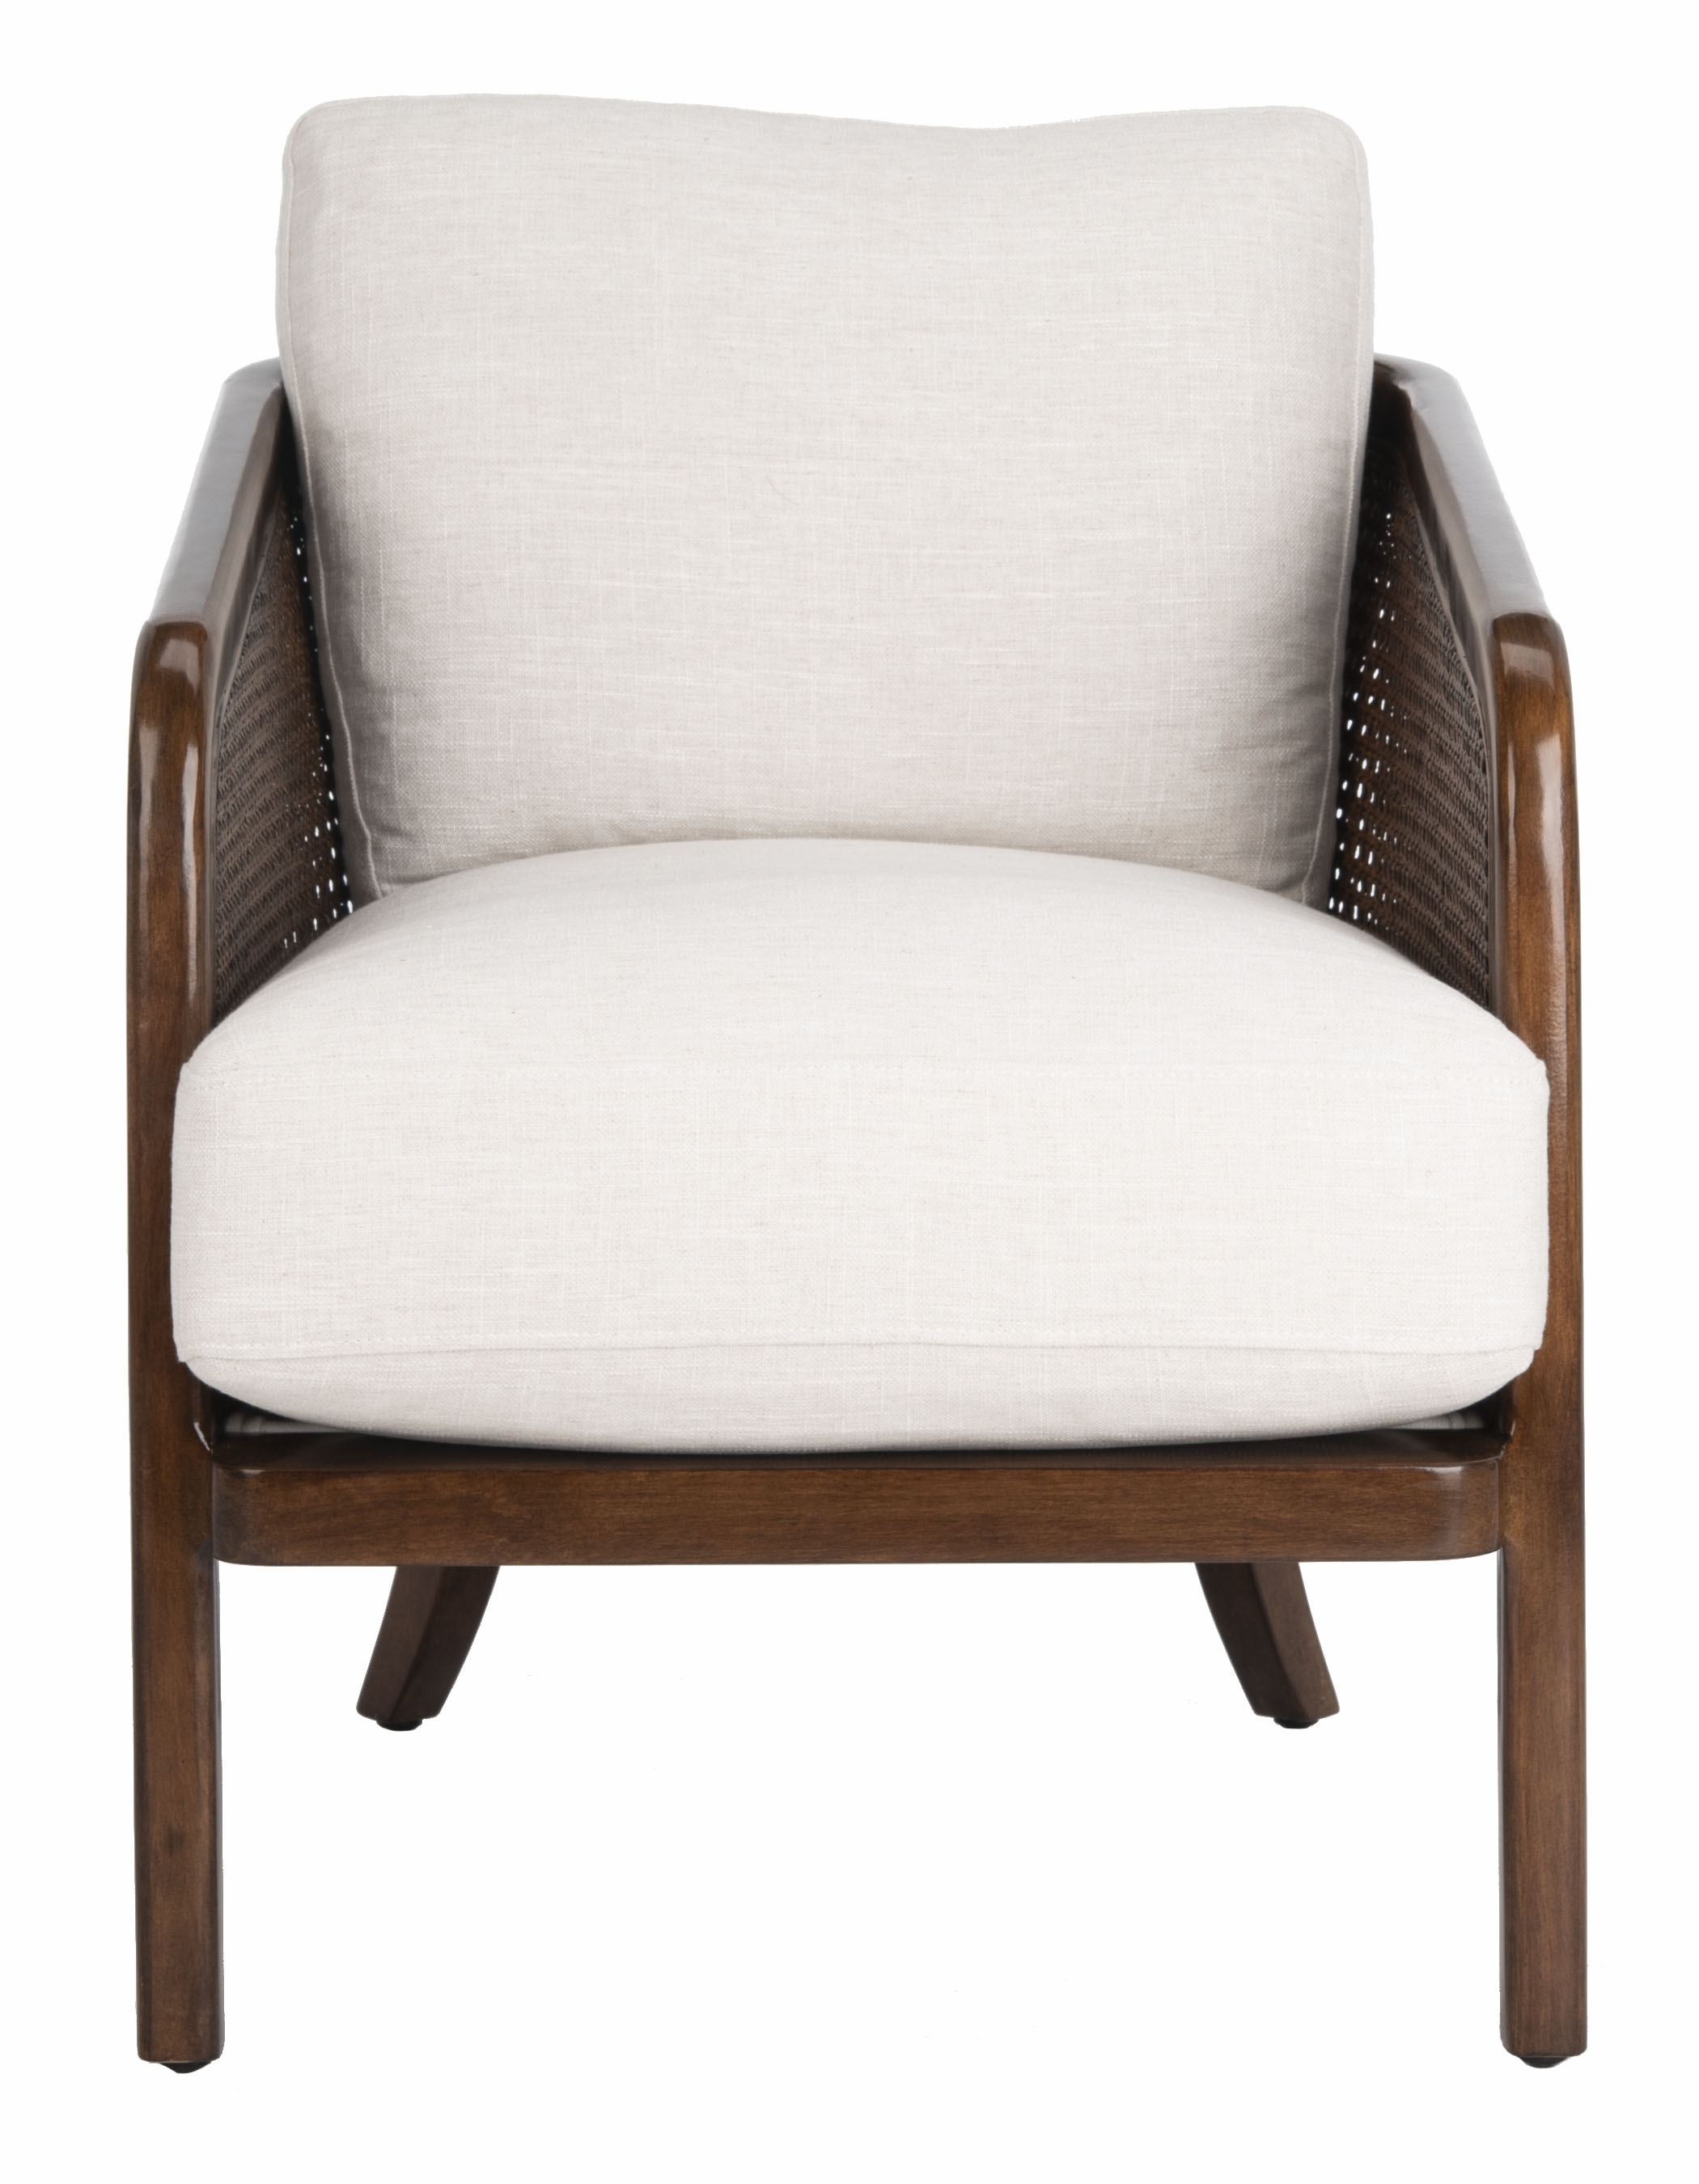 Dover Chair - Image 1